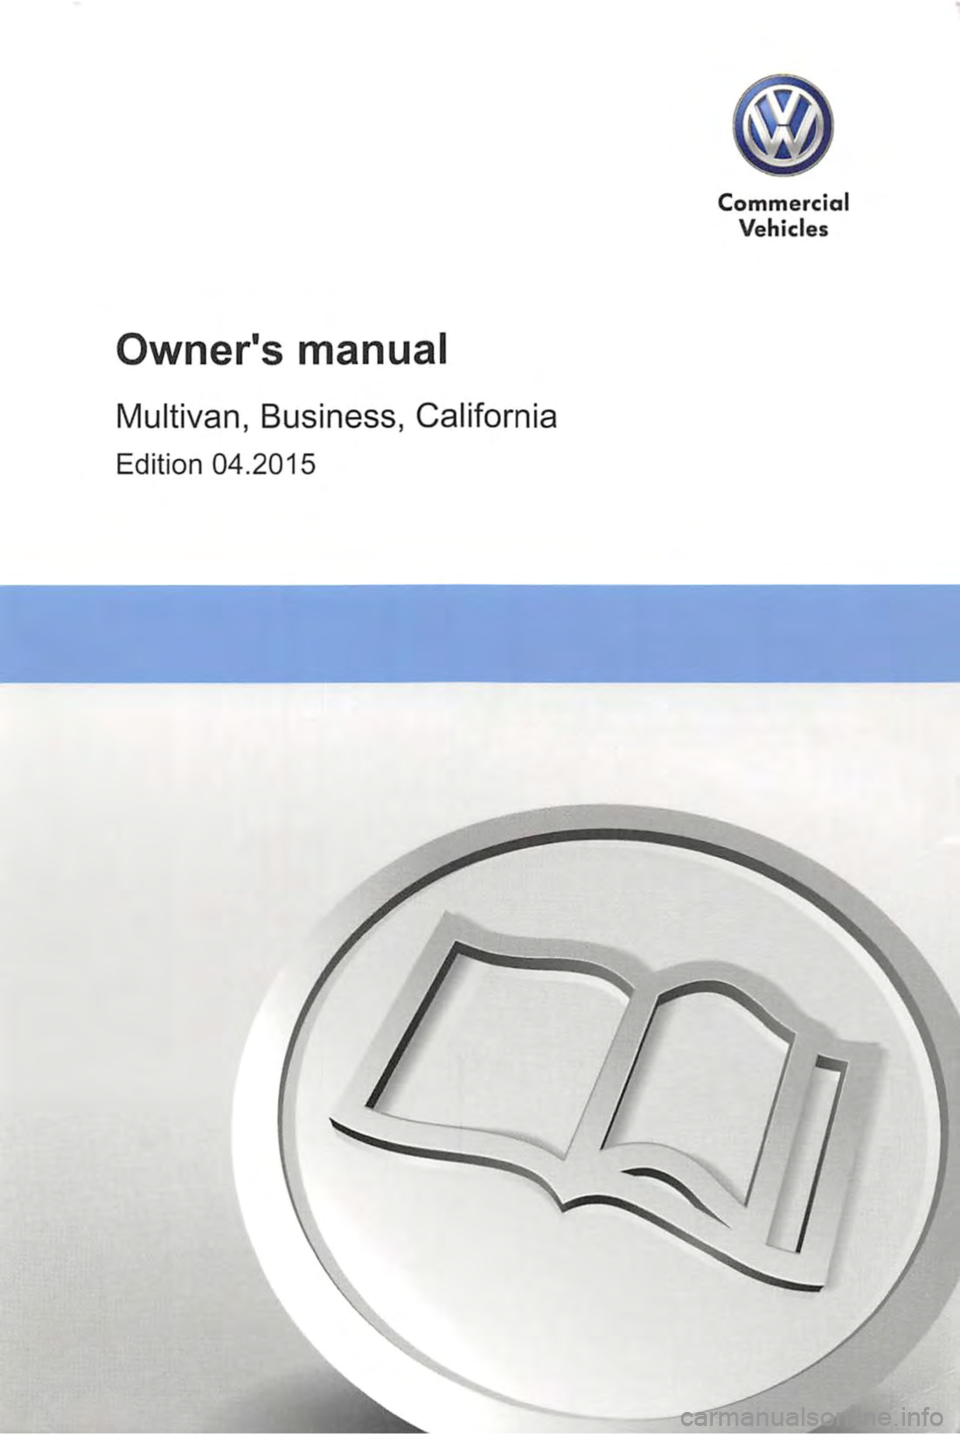 VOLKSWAGEN TRANSPORTER 2012  Owners Manual Owners manual 
Multivan, Business, California 
Edition 04.2015 
Commercial 
Vehicles  